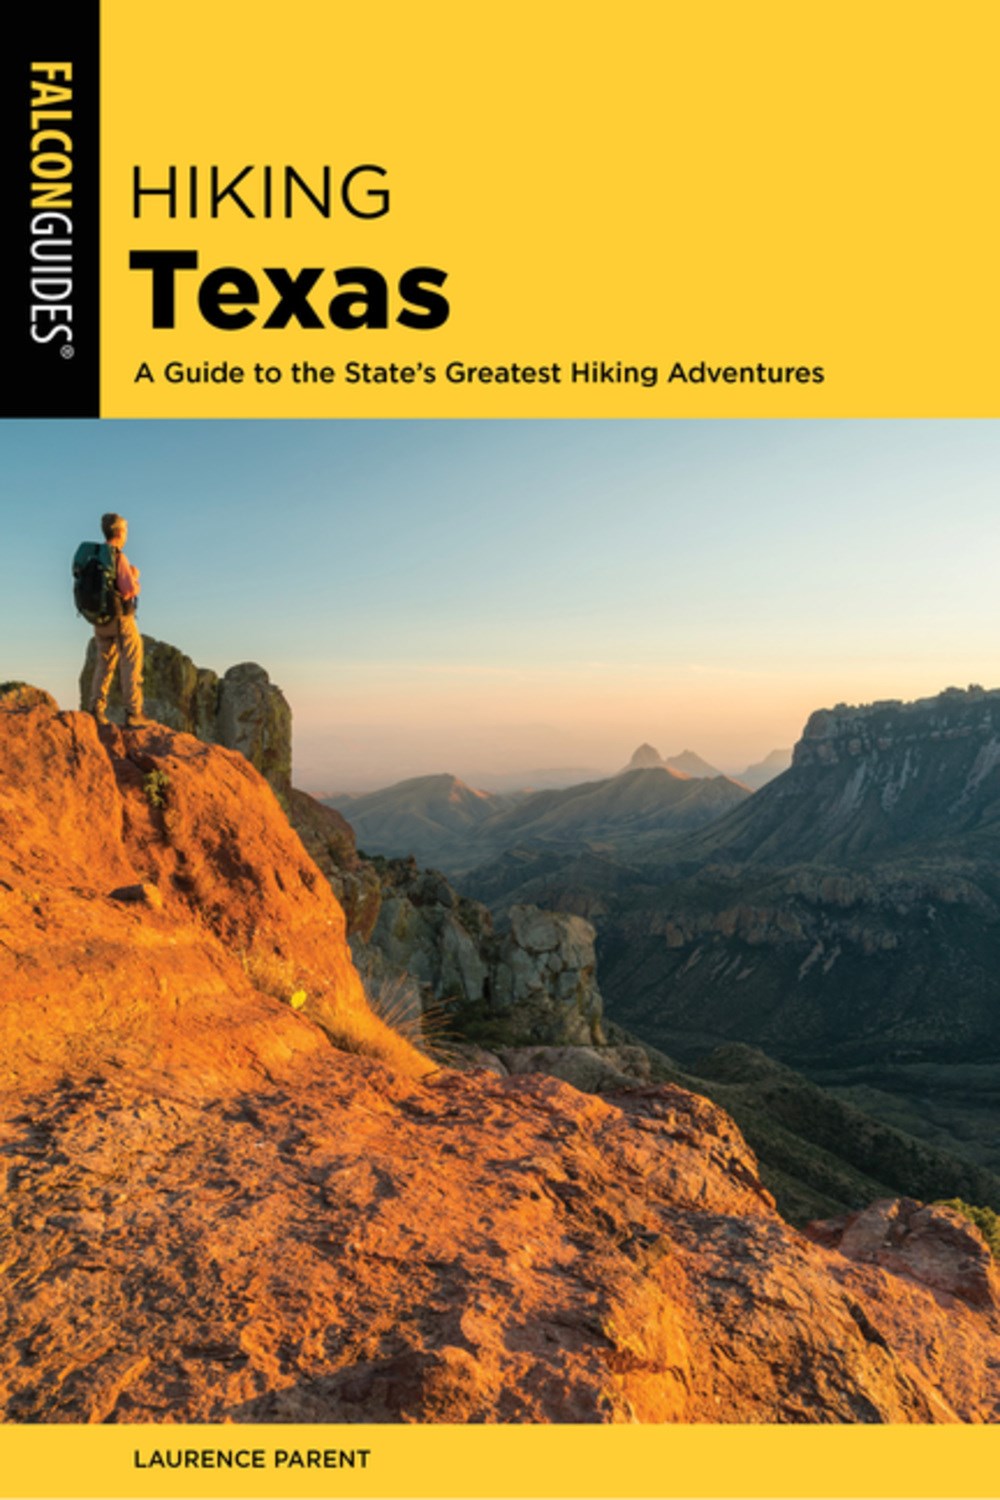 Hiking Texas: A Guide to the State's Greatest Hiking Adventures (3rd Edition)